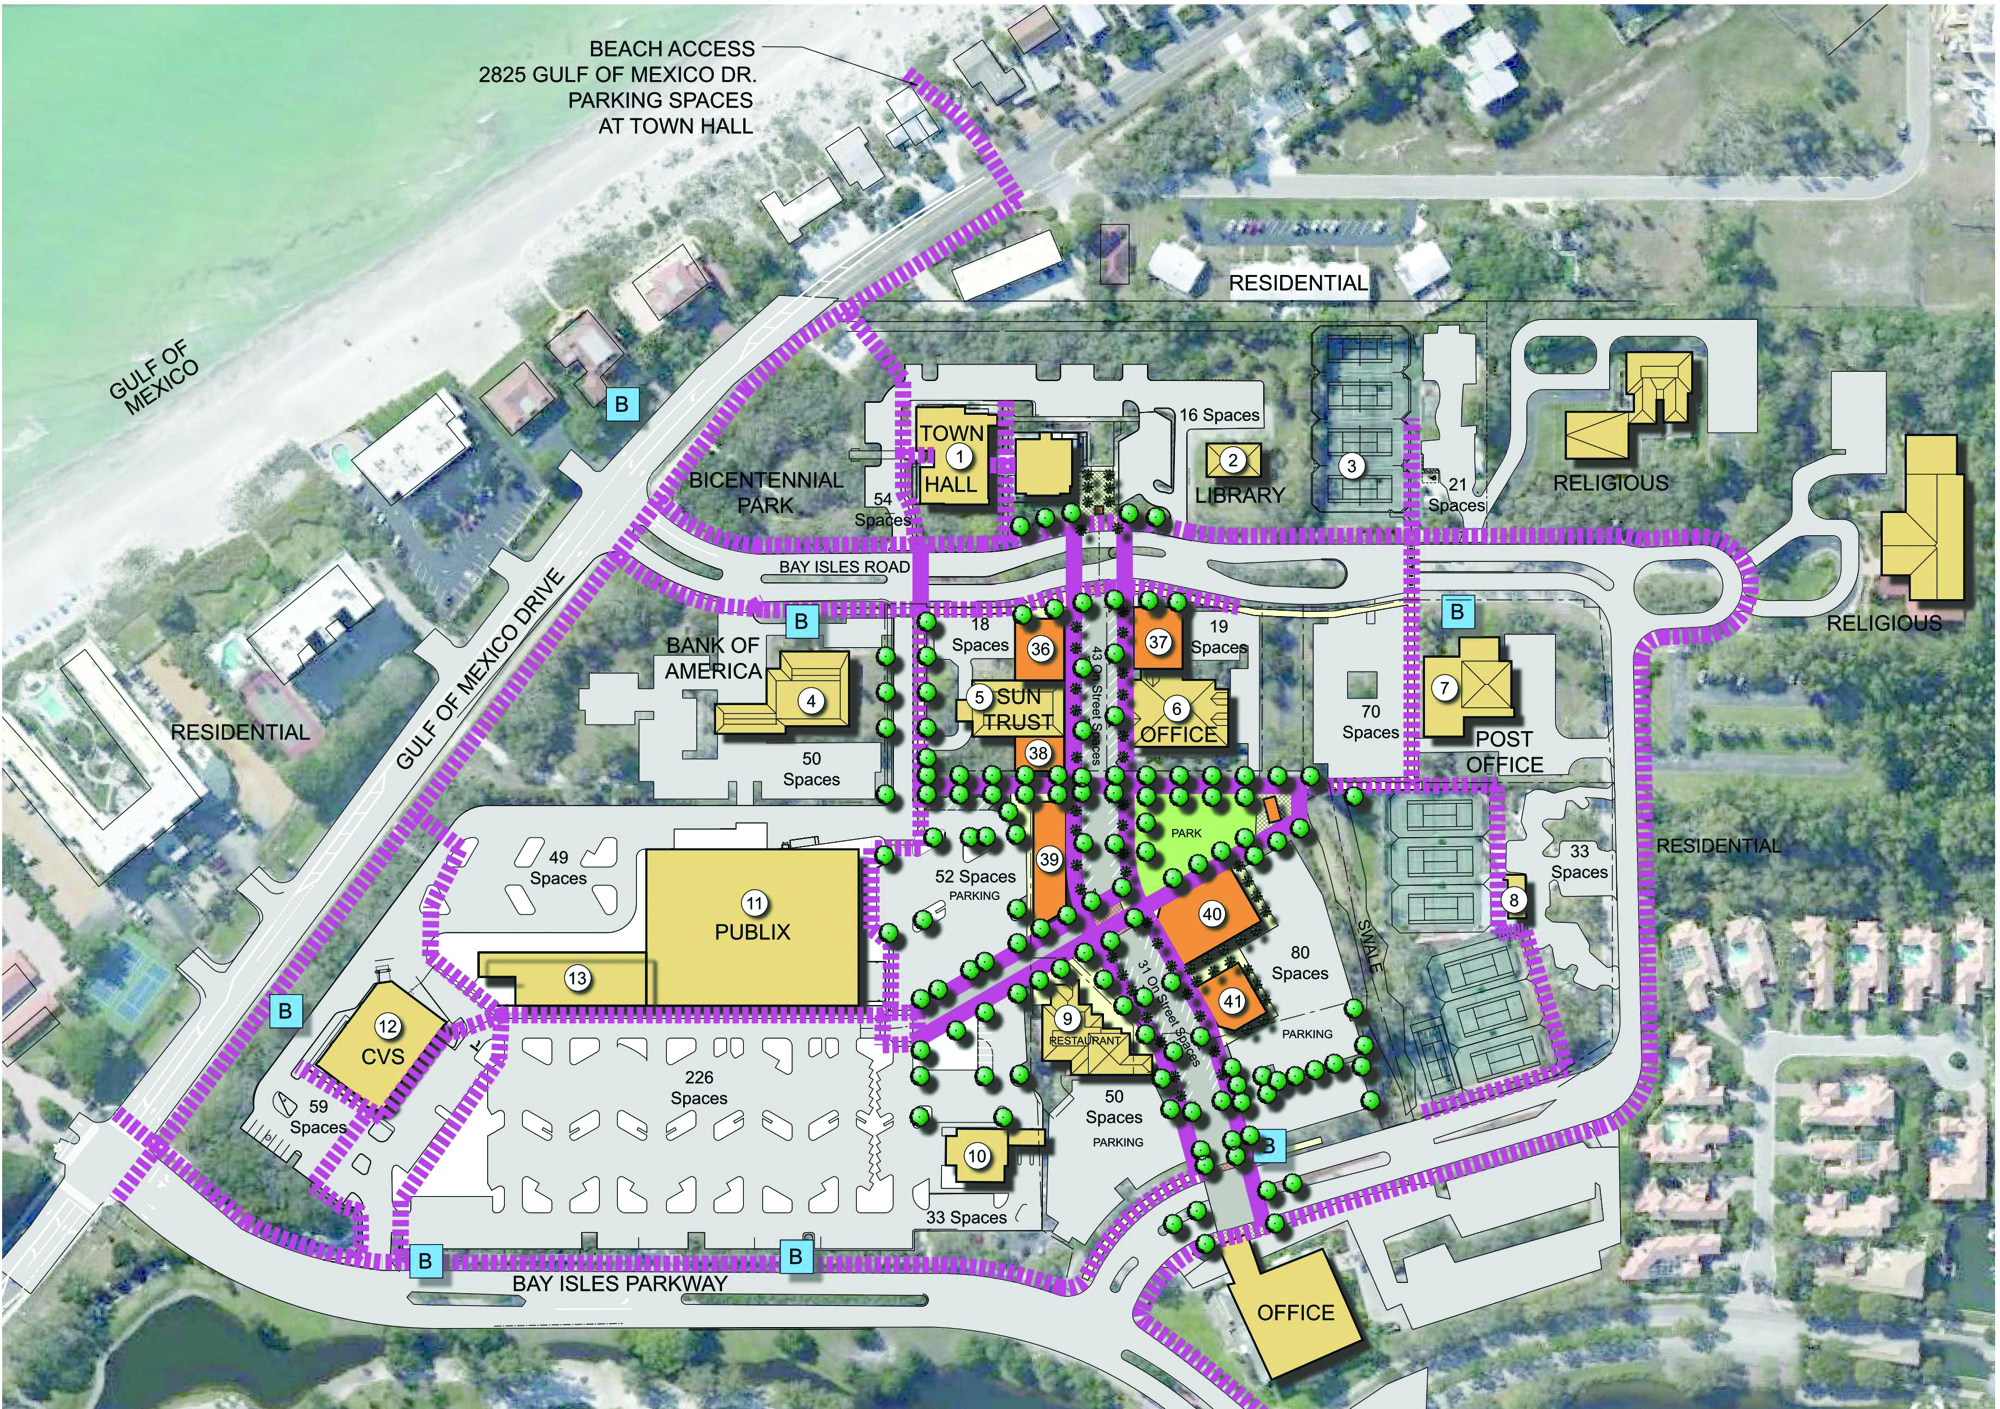 Sarasota architect Gary Hoyt created this rendering of a town center parkway, including the much-discussed center for the arts, culture and education (40 and 41) and a new road to extend from Bay Isles Road to Bay Isles Parkway.